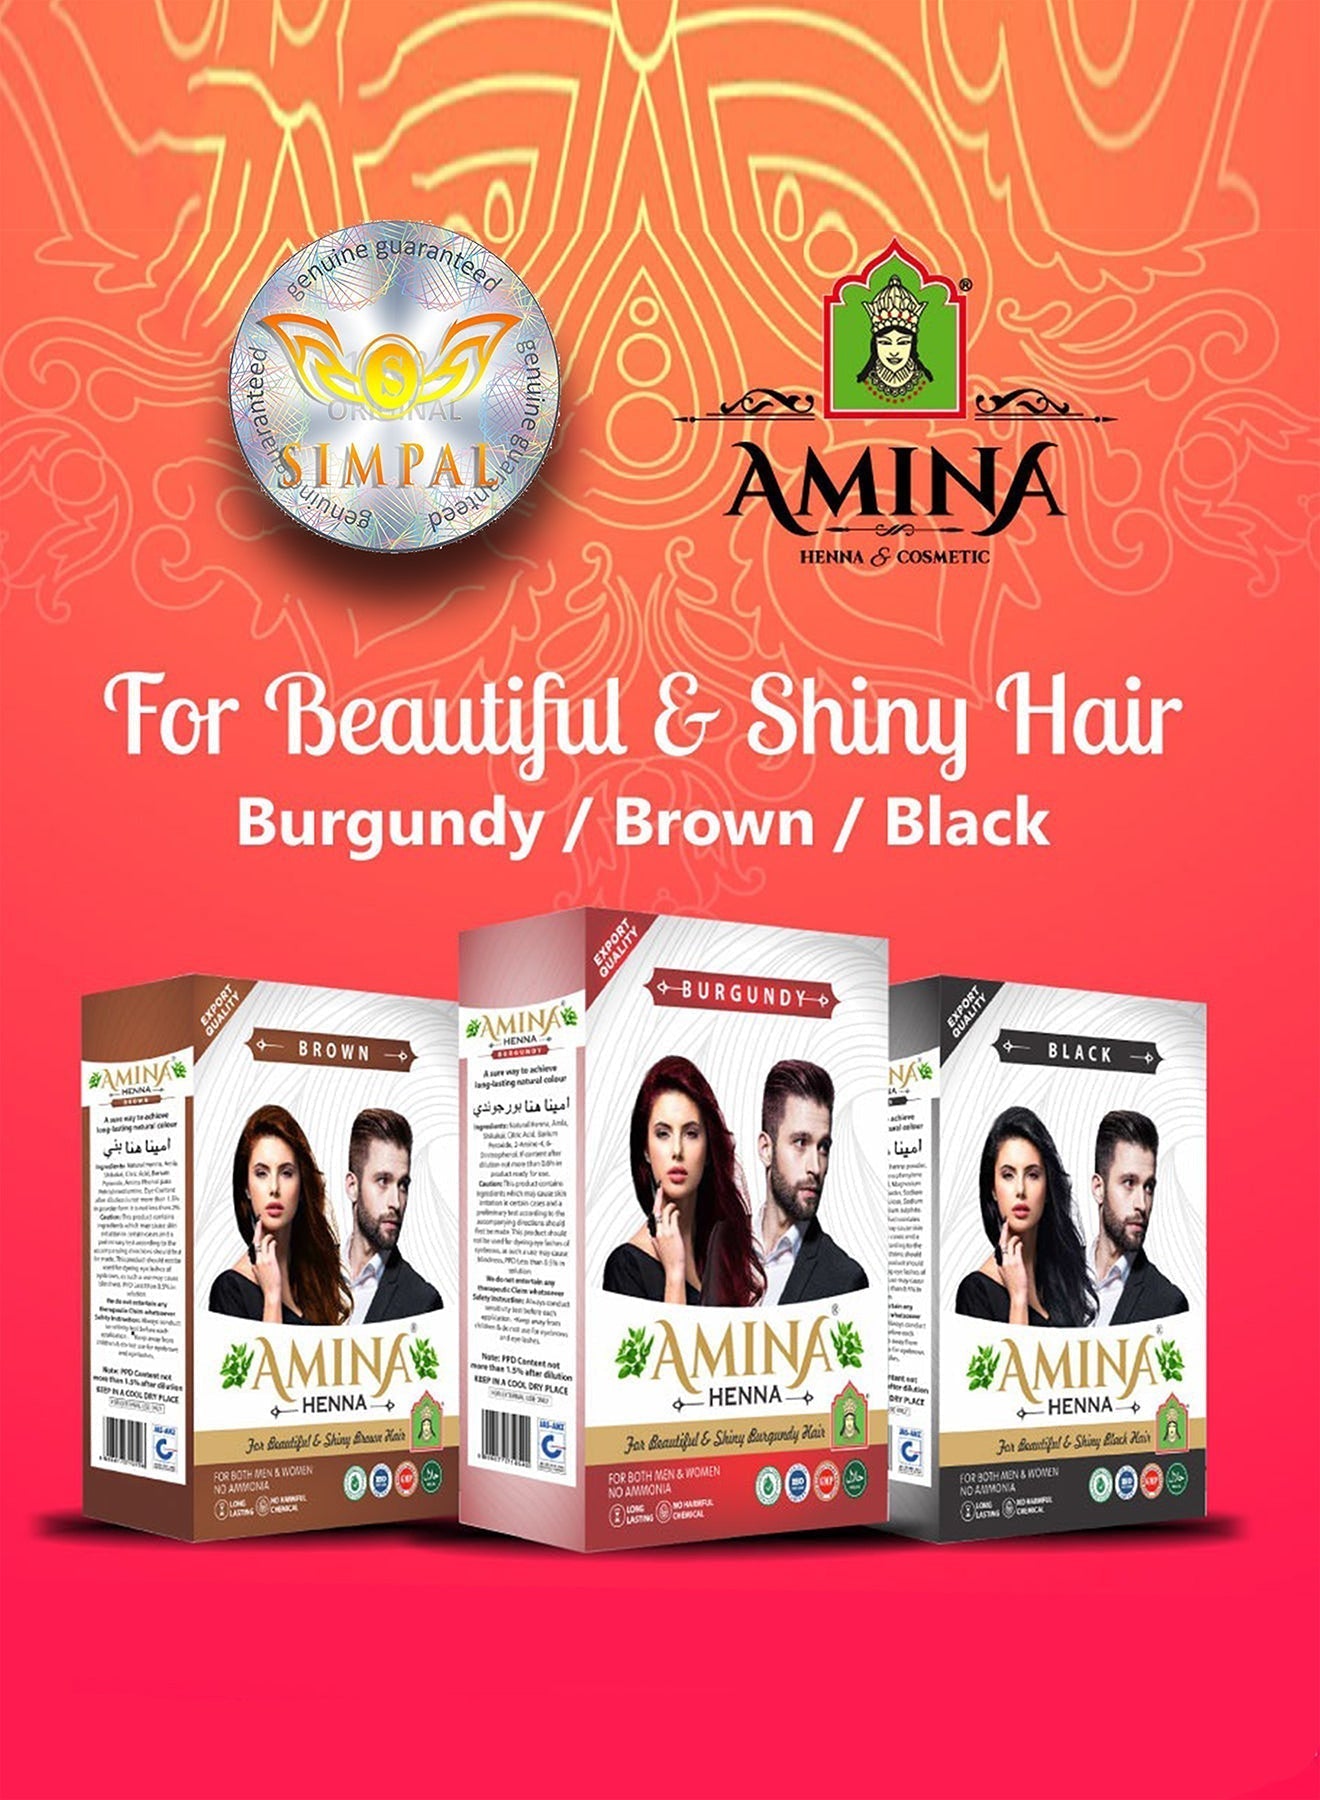 Amina Henna Natural Color Black 10g x 6 pouch Value Pack of 2 